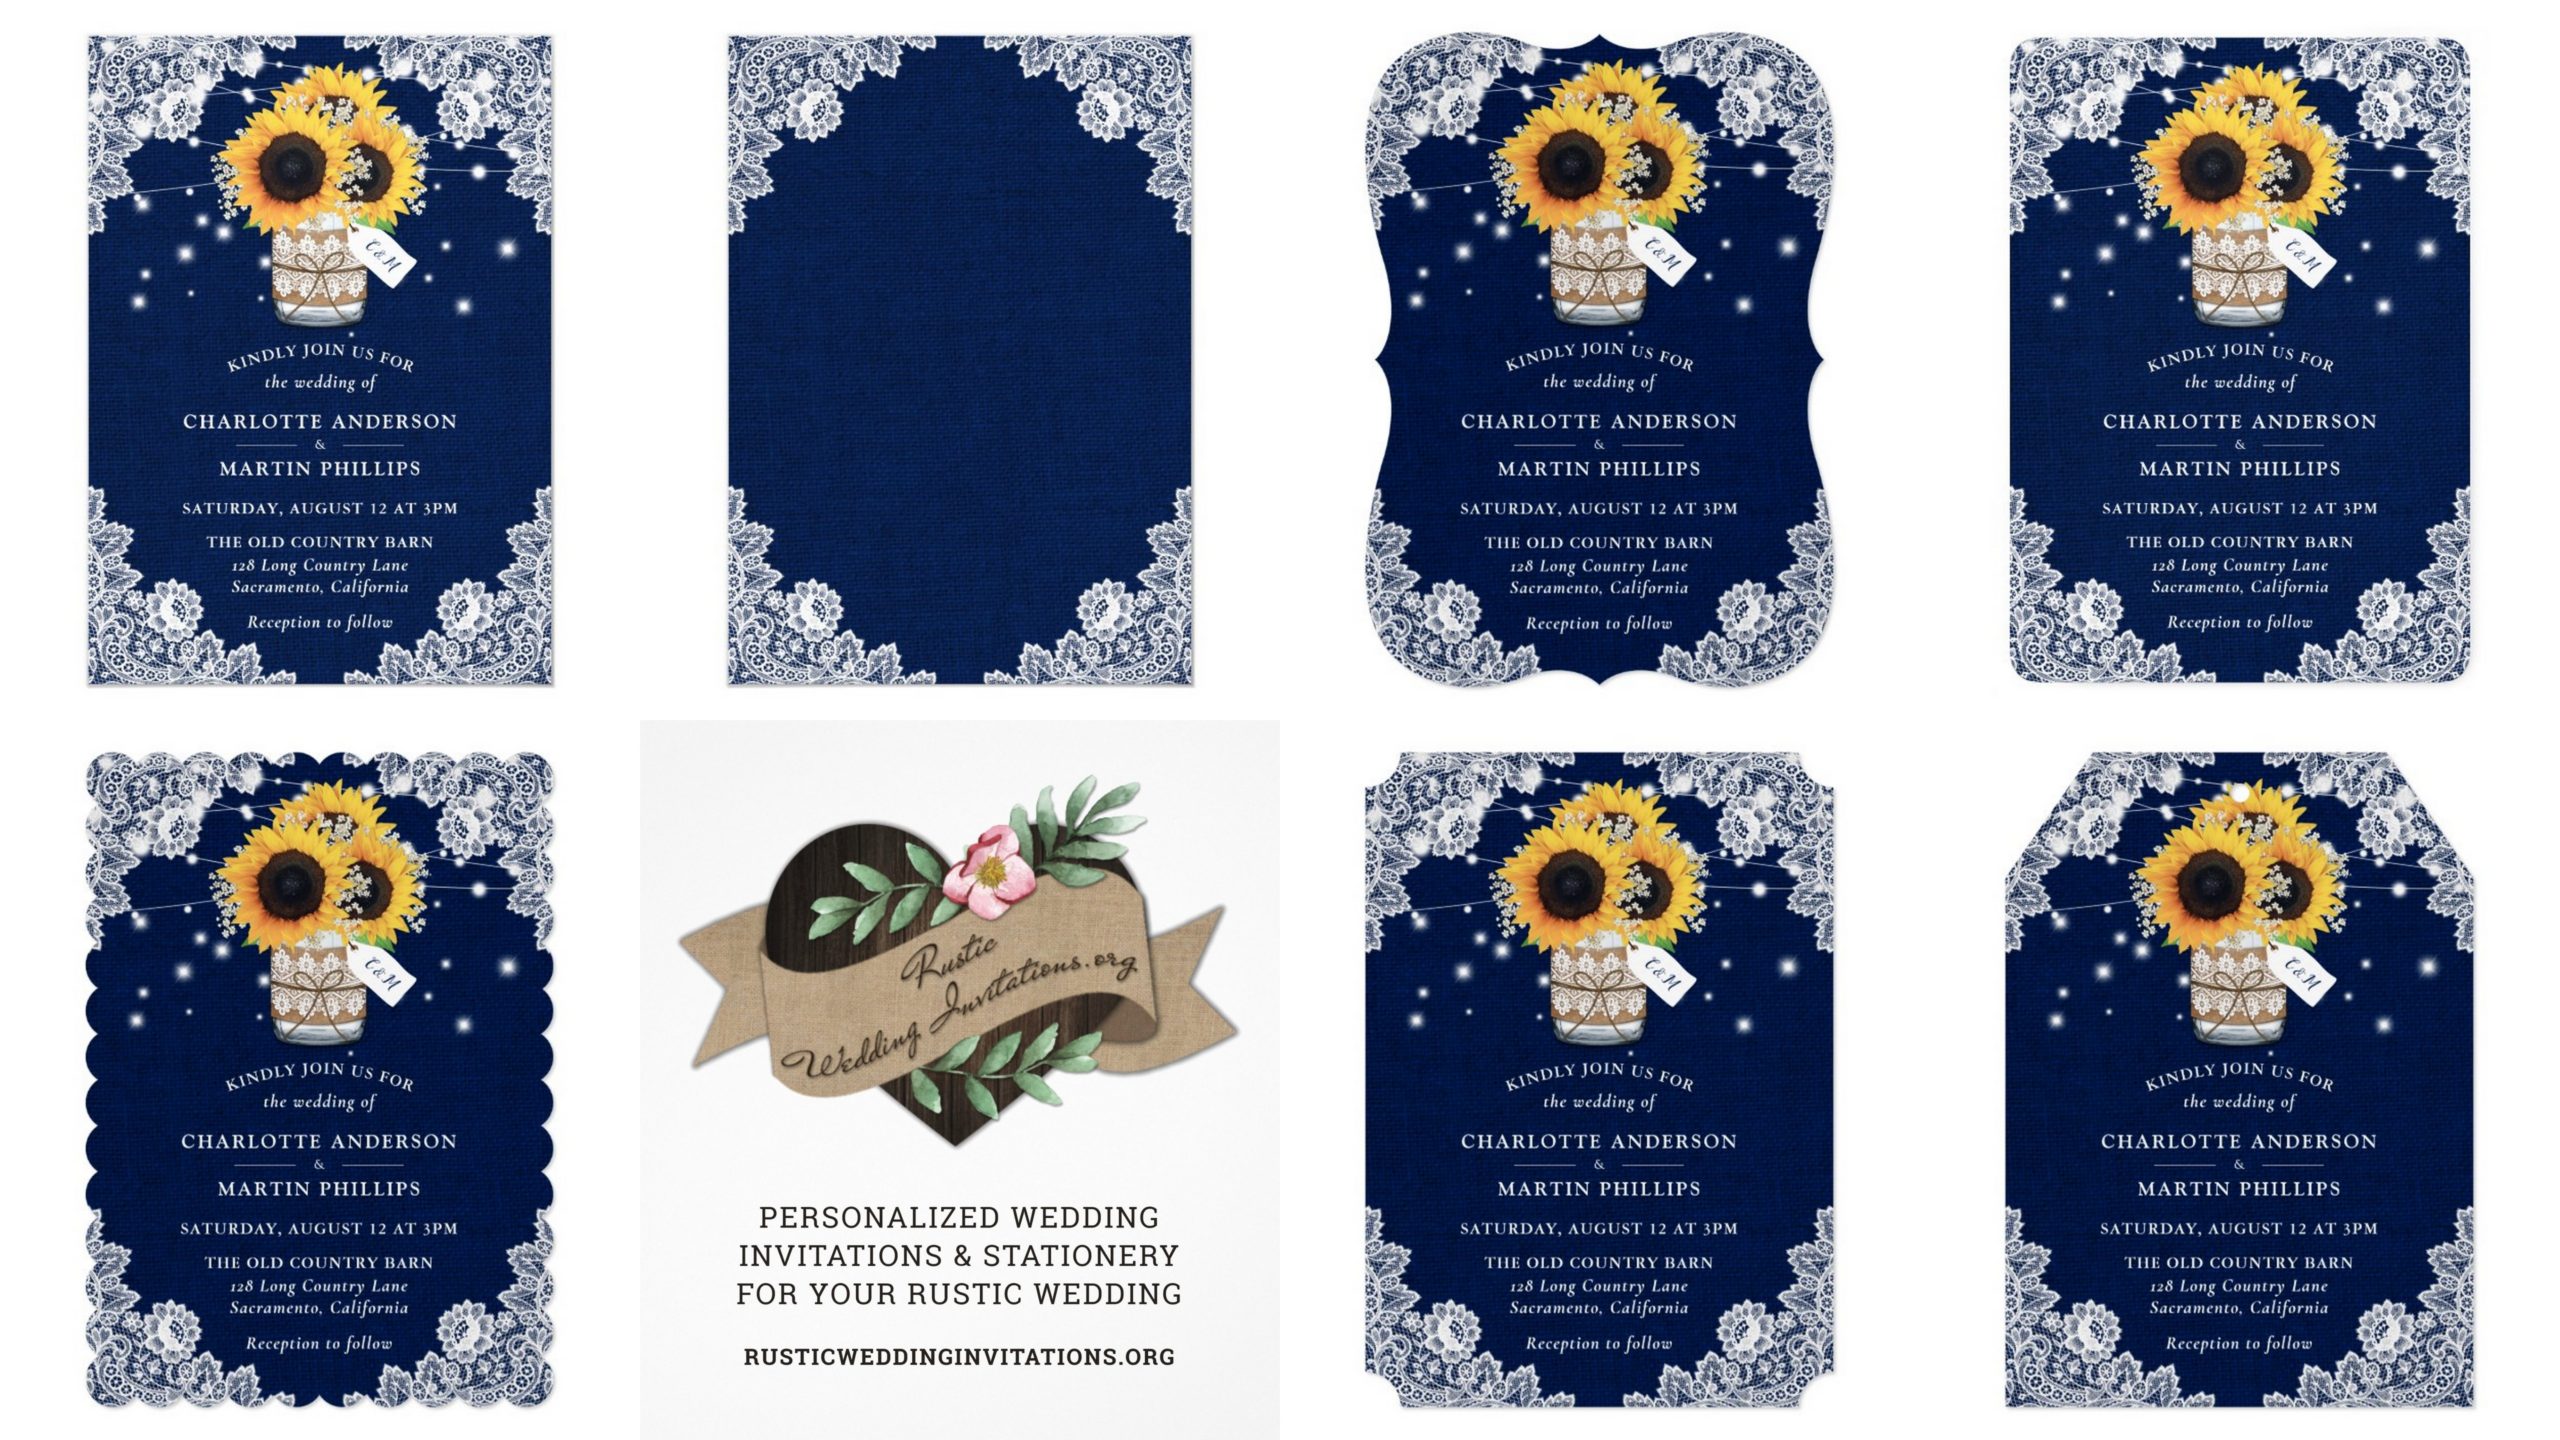 Personalized Wedding Invitations and Stationery